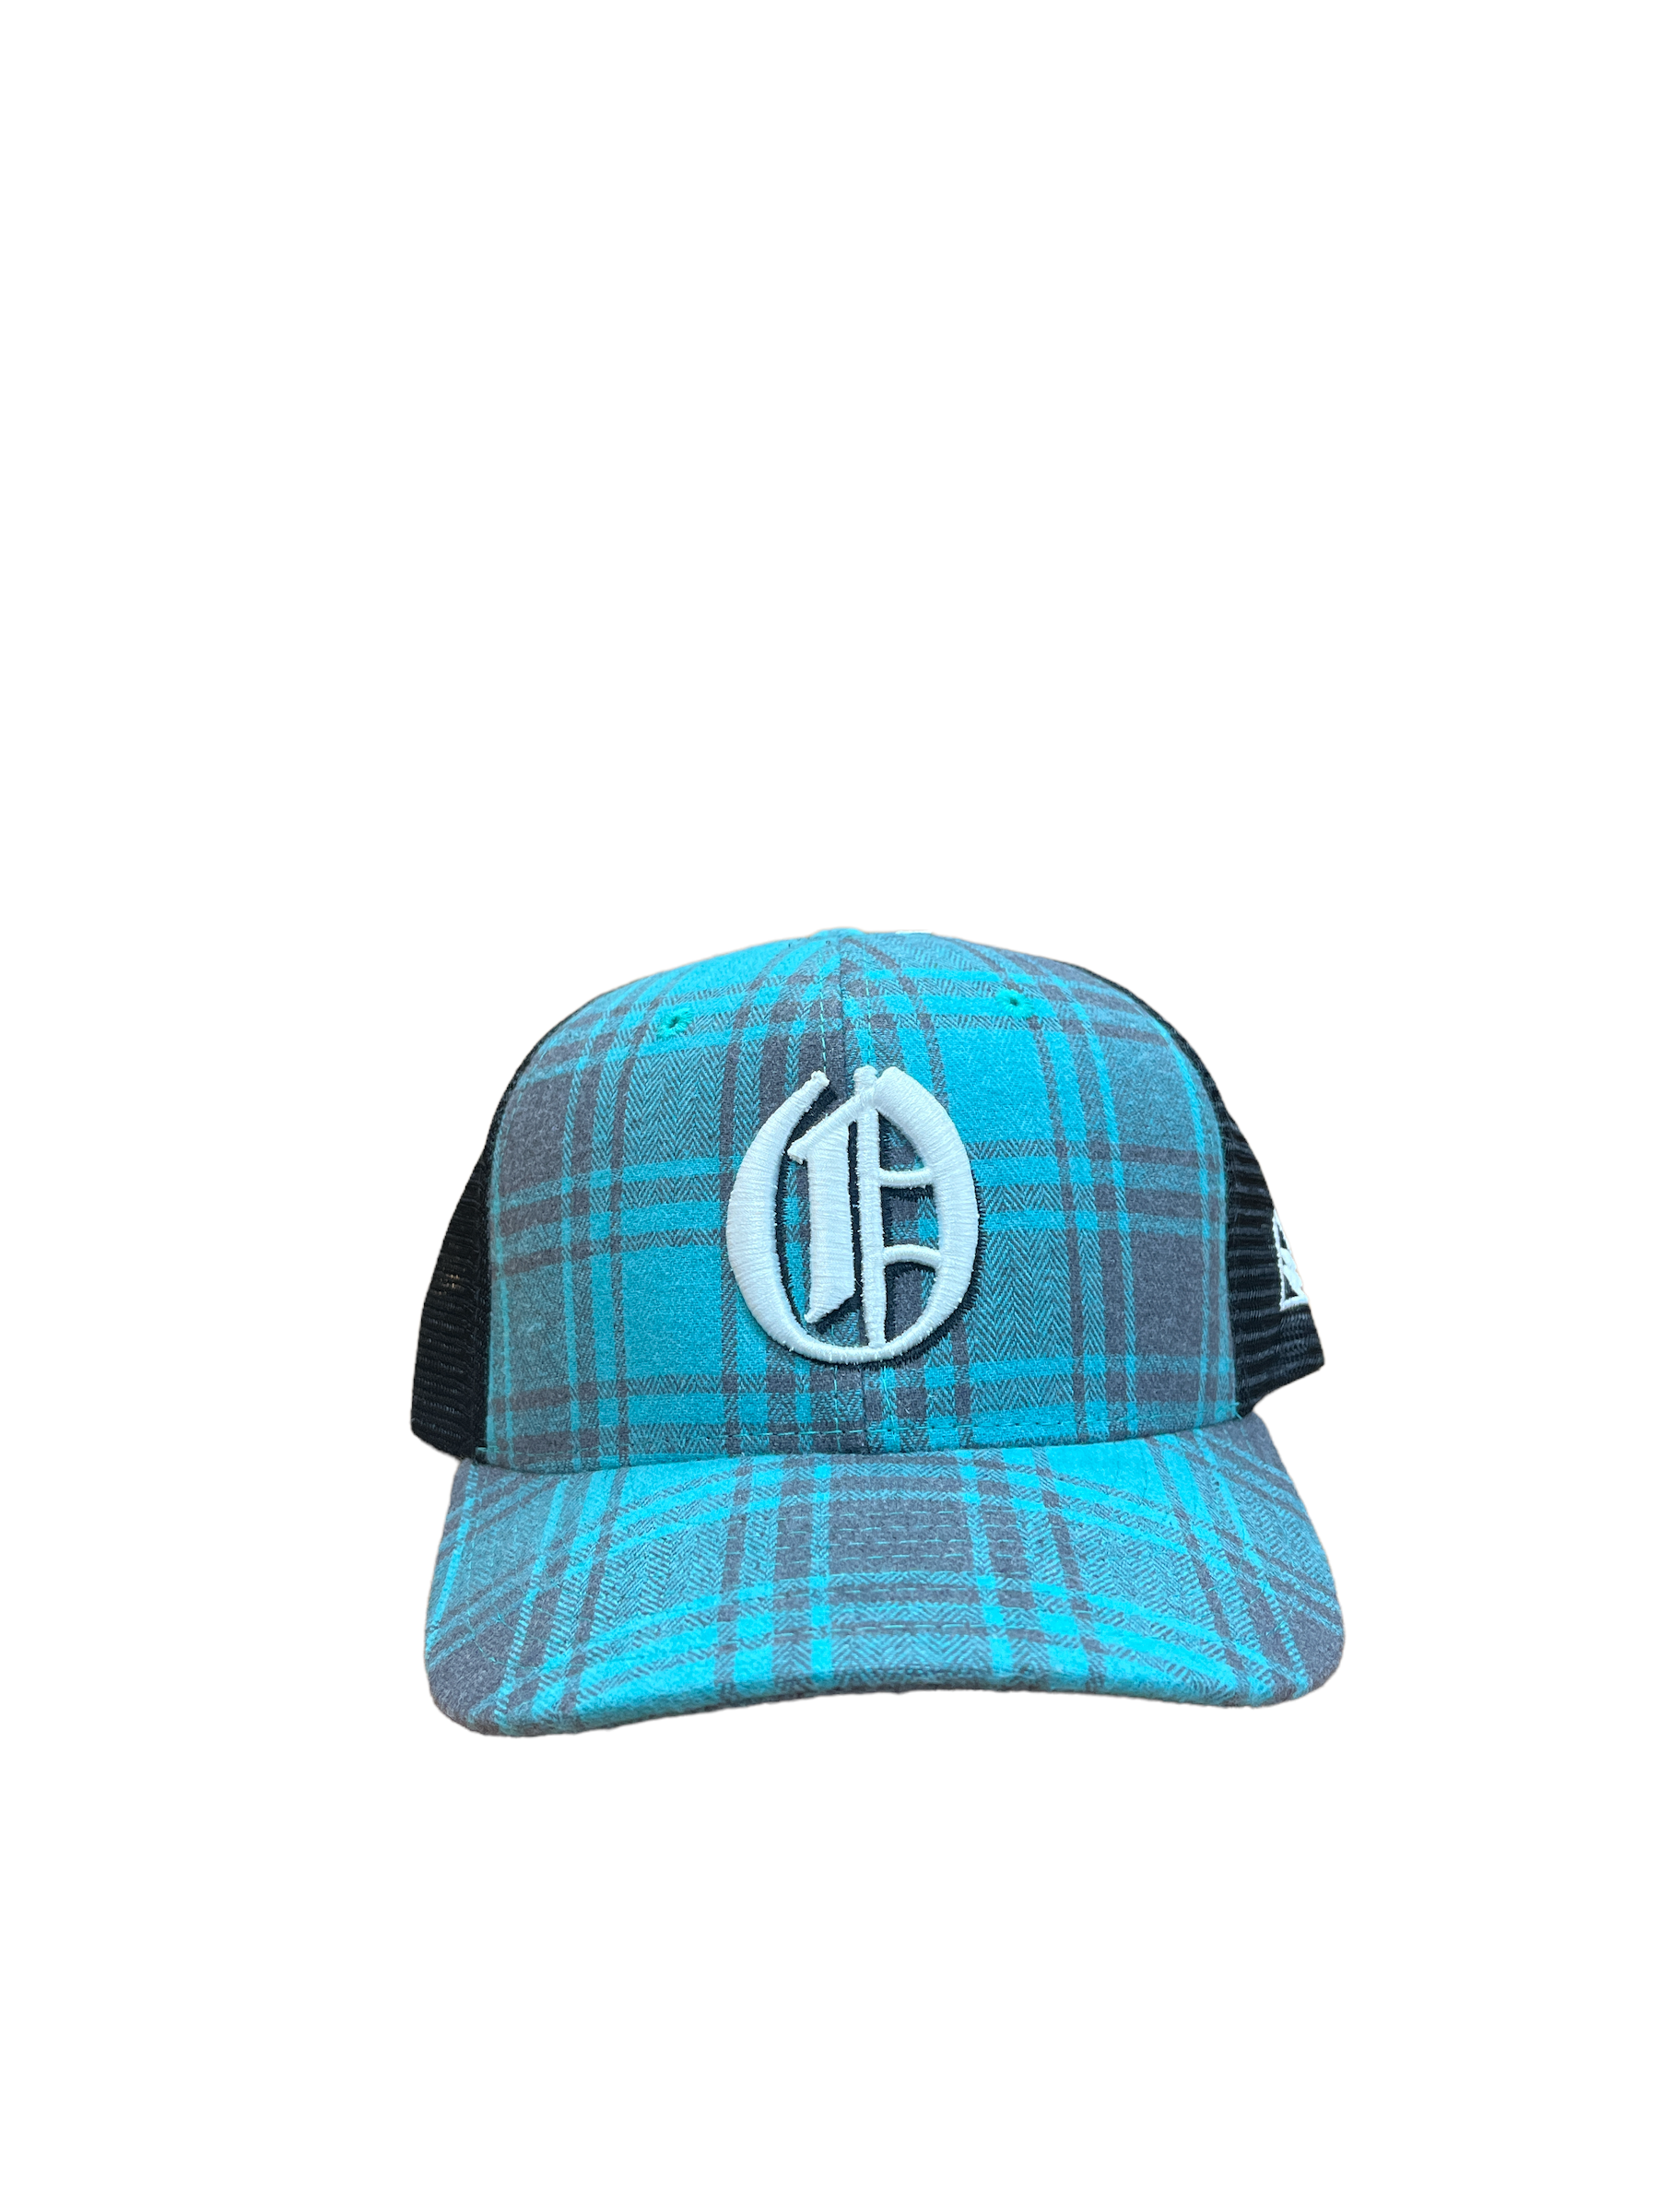 King O Trucker Hat (Turquoise)